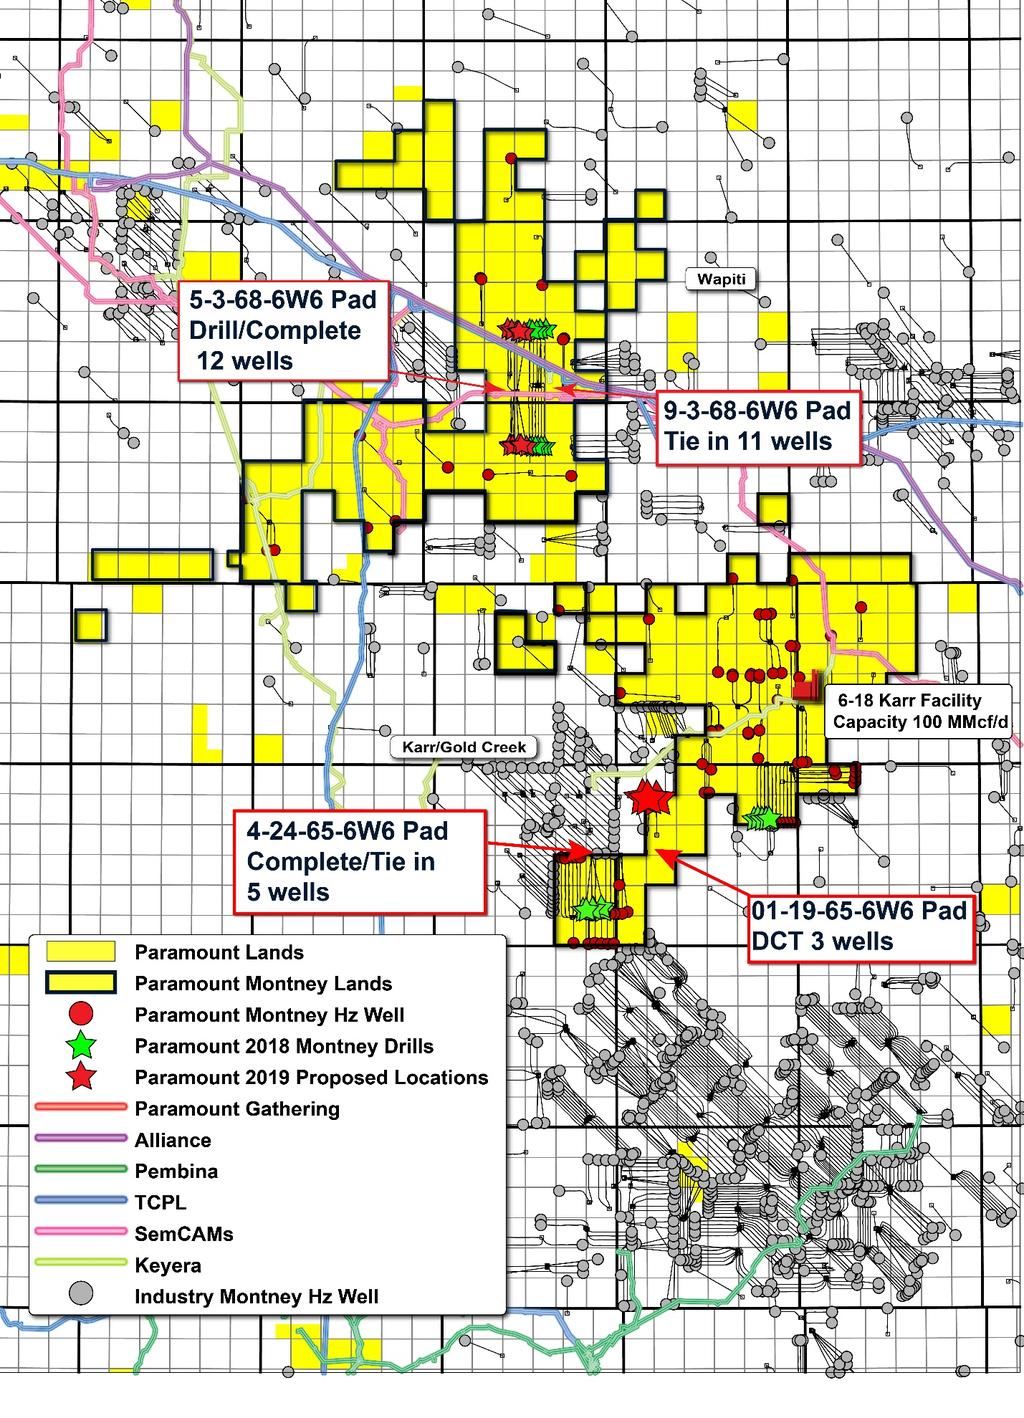 2018. In 2019, Paramount brought the remaining two wells from the 2018 program on production and plans to drill, complete and bring on production 3 (3.0) net wells on a new multi-well pad.